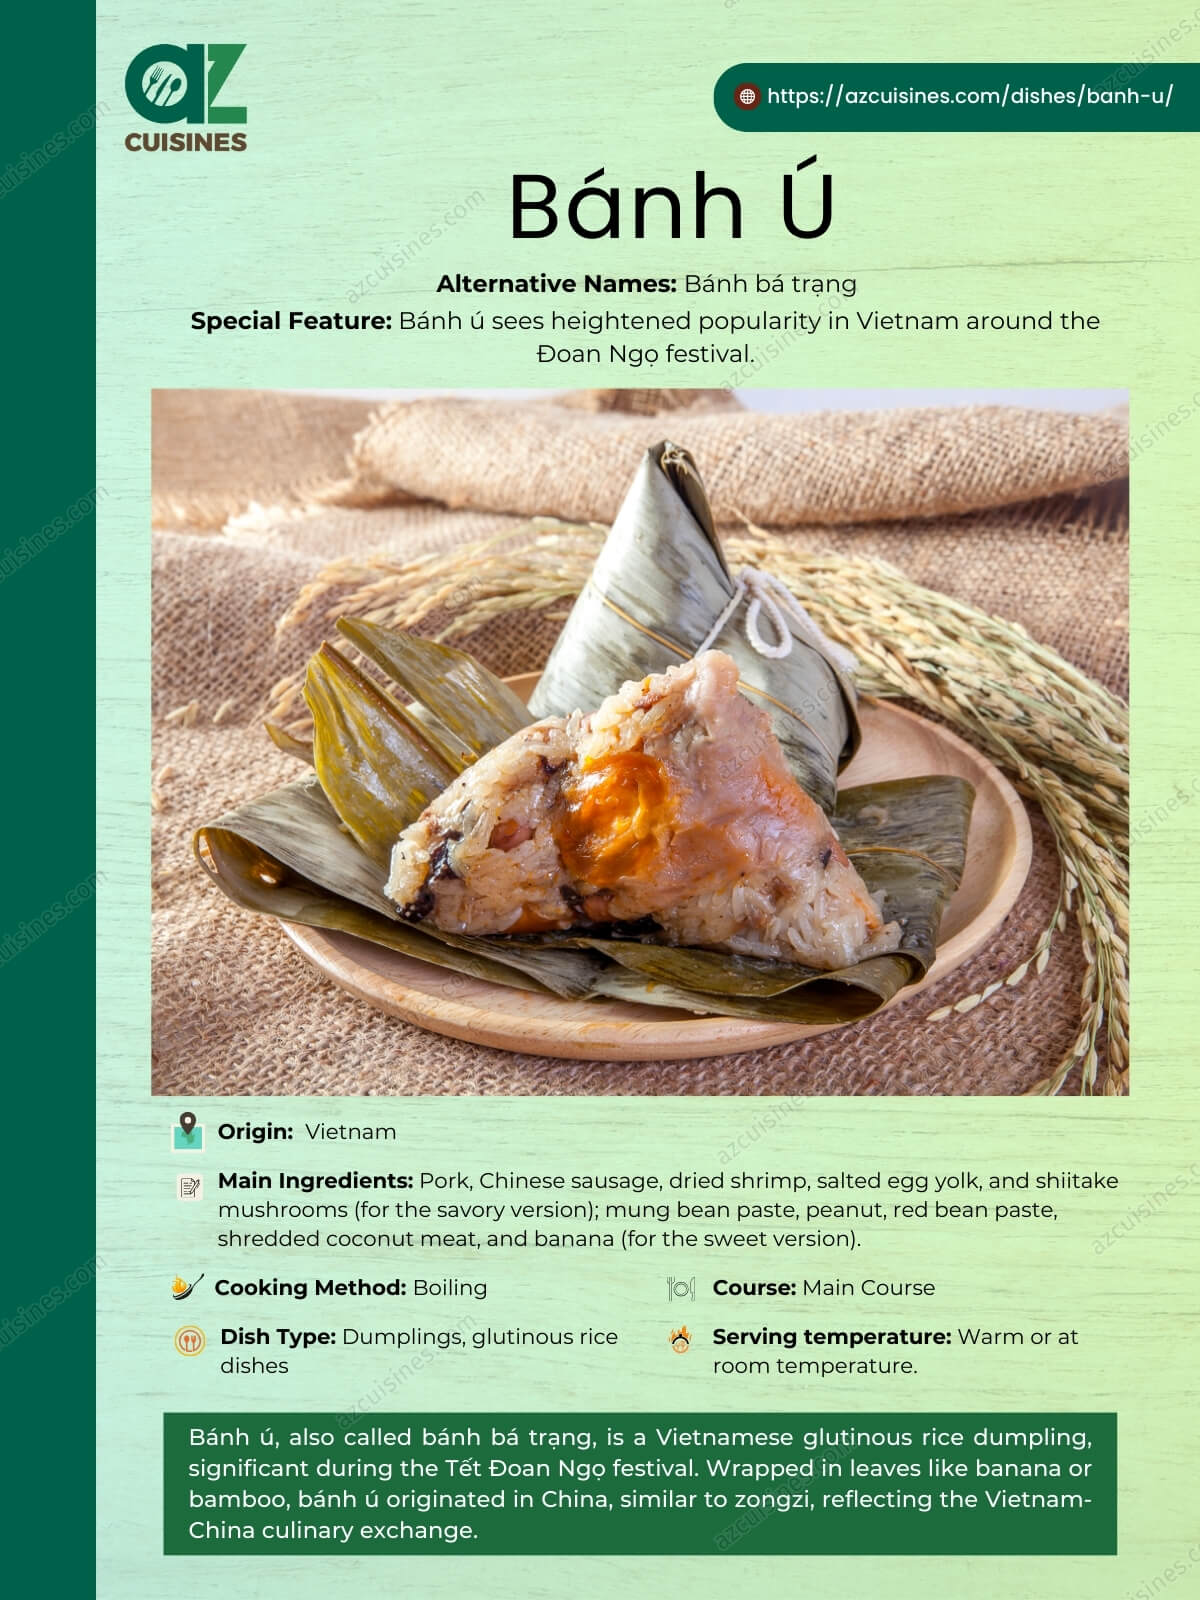 Banh U Overview